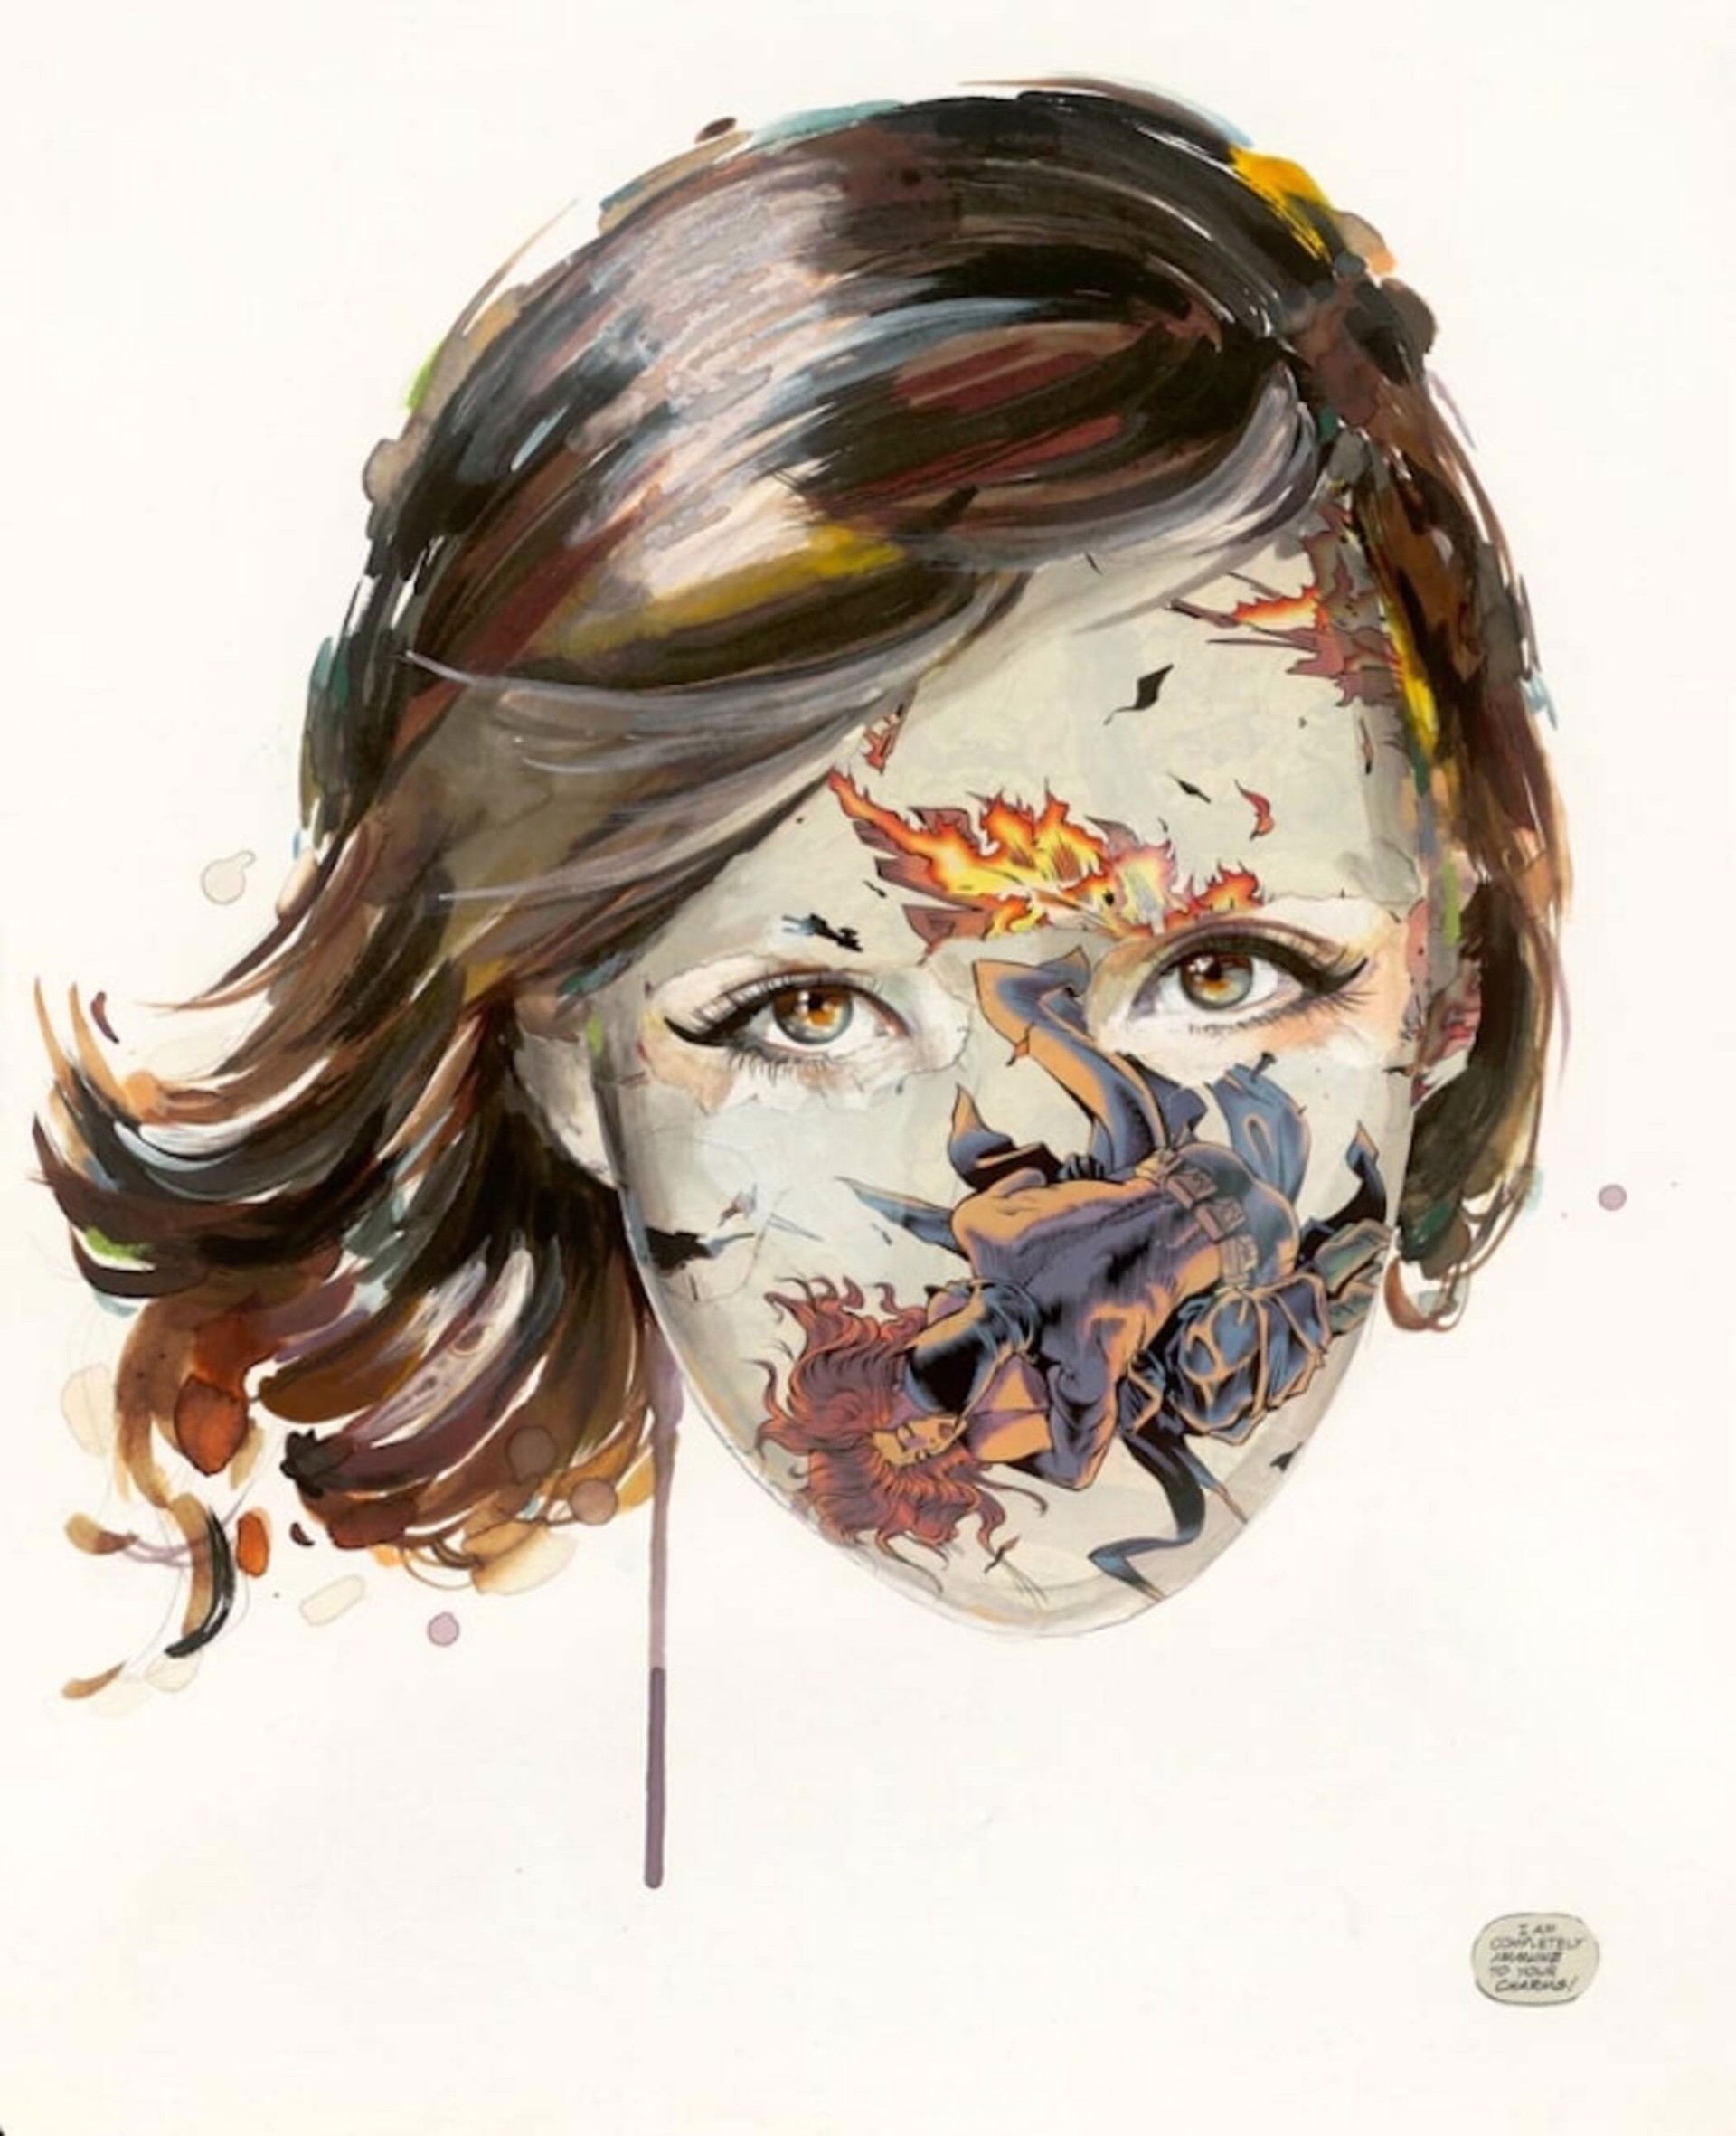 Les Cage Immunisee A Ses Charmes by Sandra Chevrier